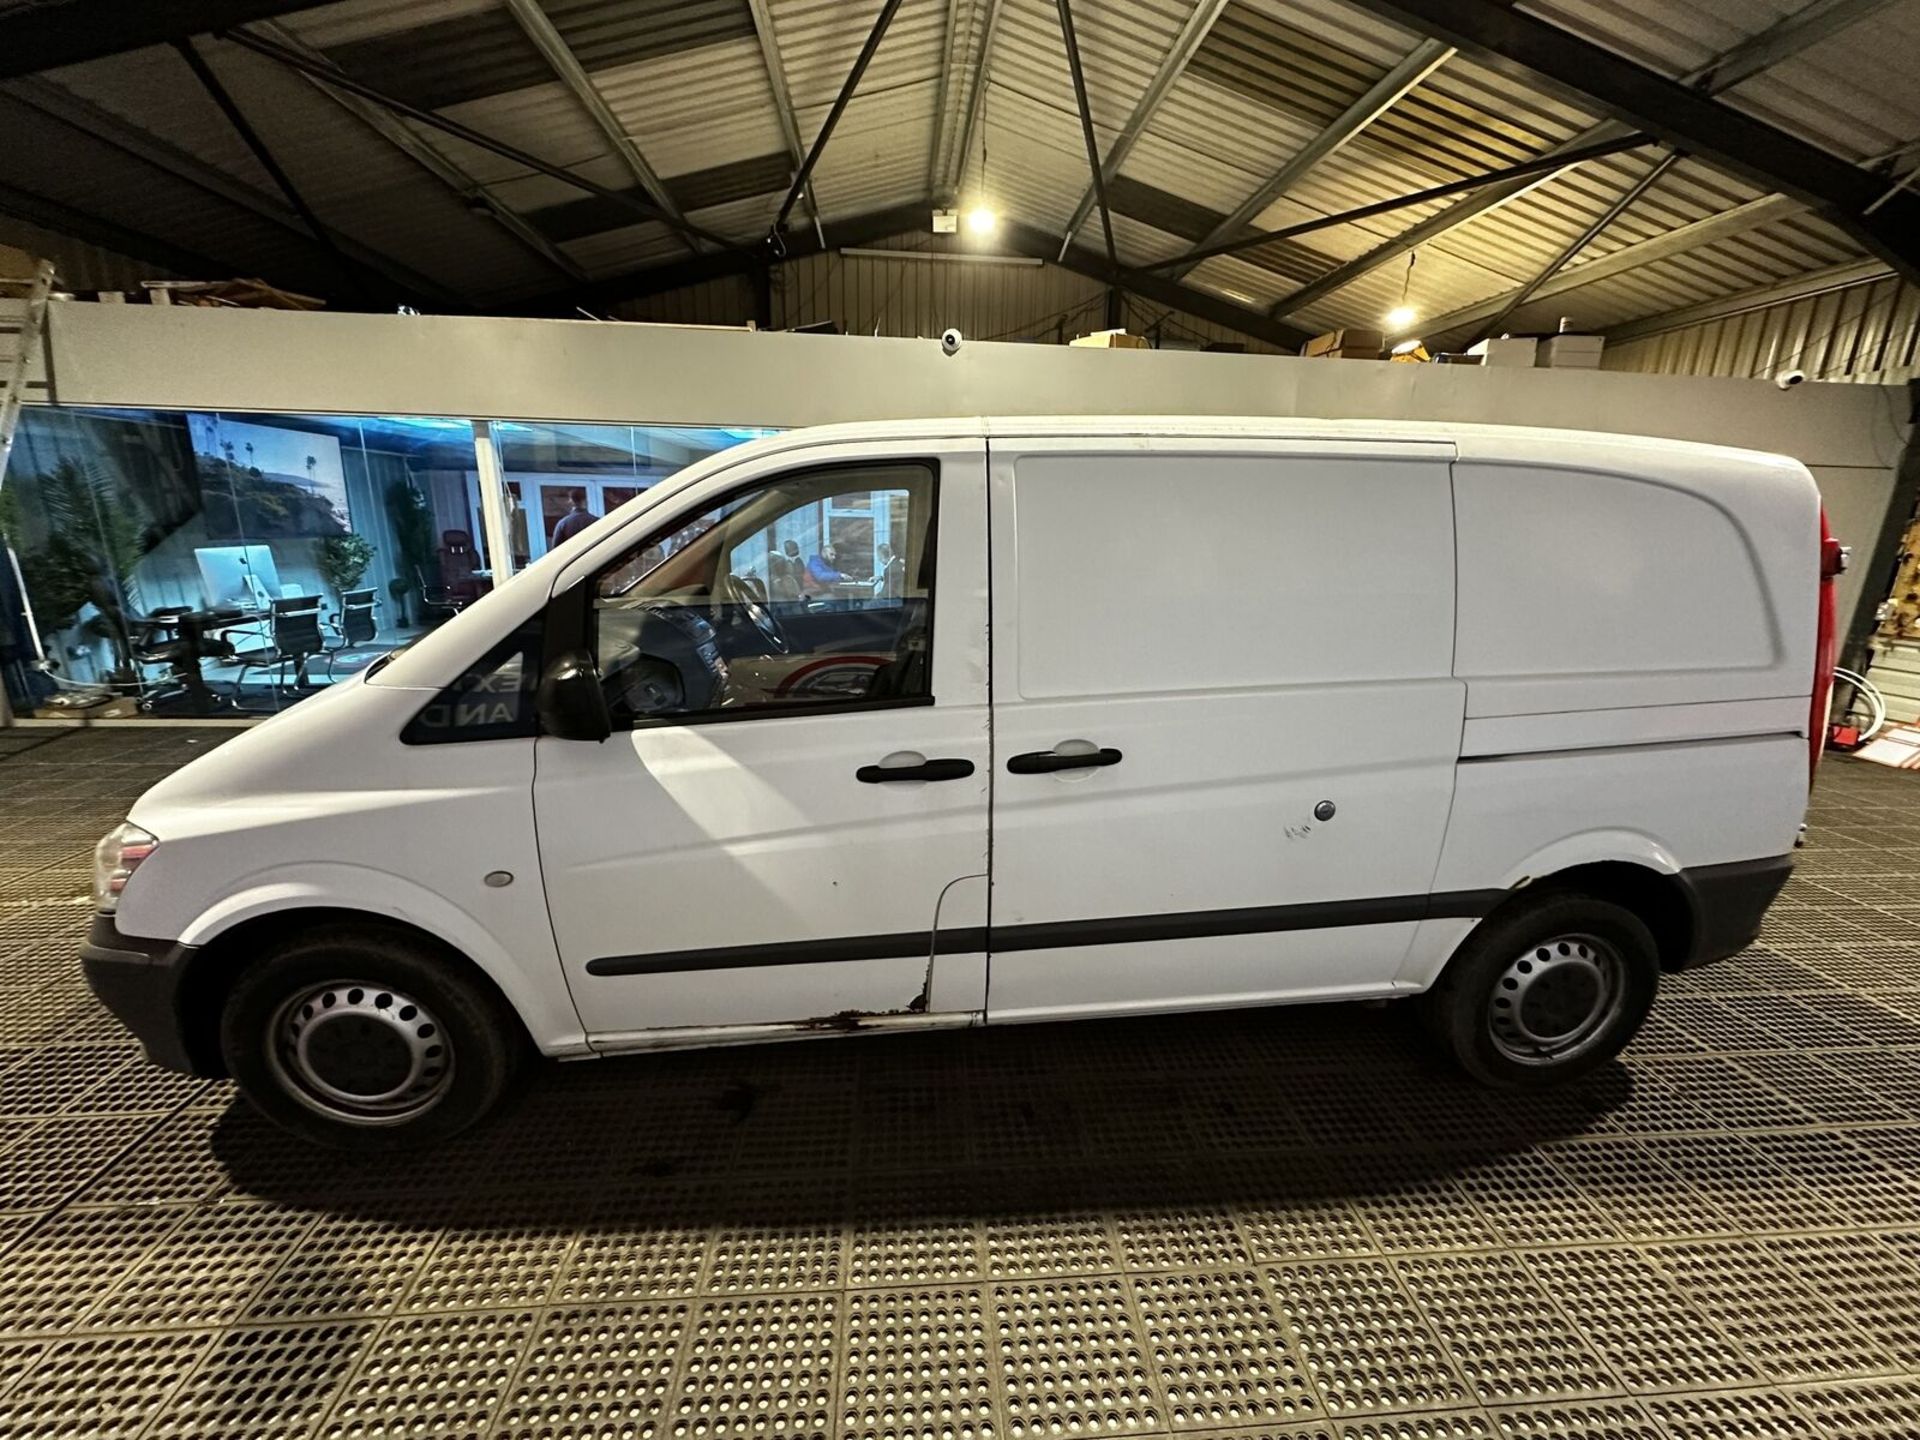 63 PLATE MERCEDES-BENZ VITO LONG DIESEL: READY FOR ACTION >>--NO VAT ON HAMMER--<< - Image 10 of 12